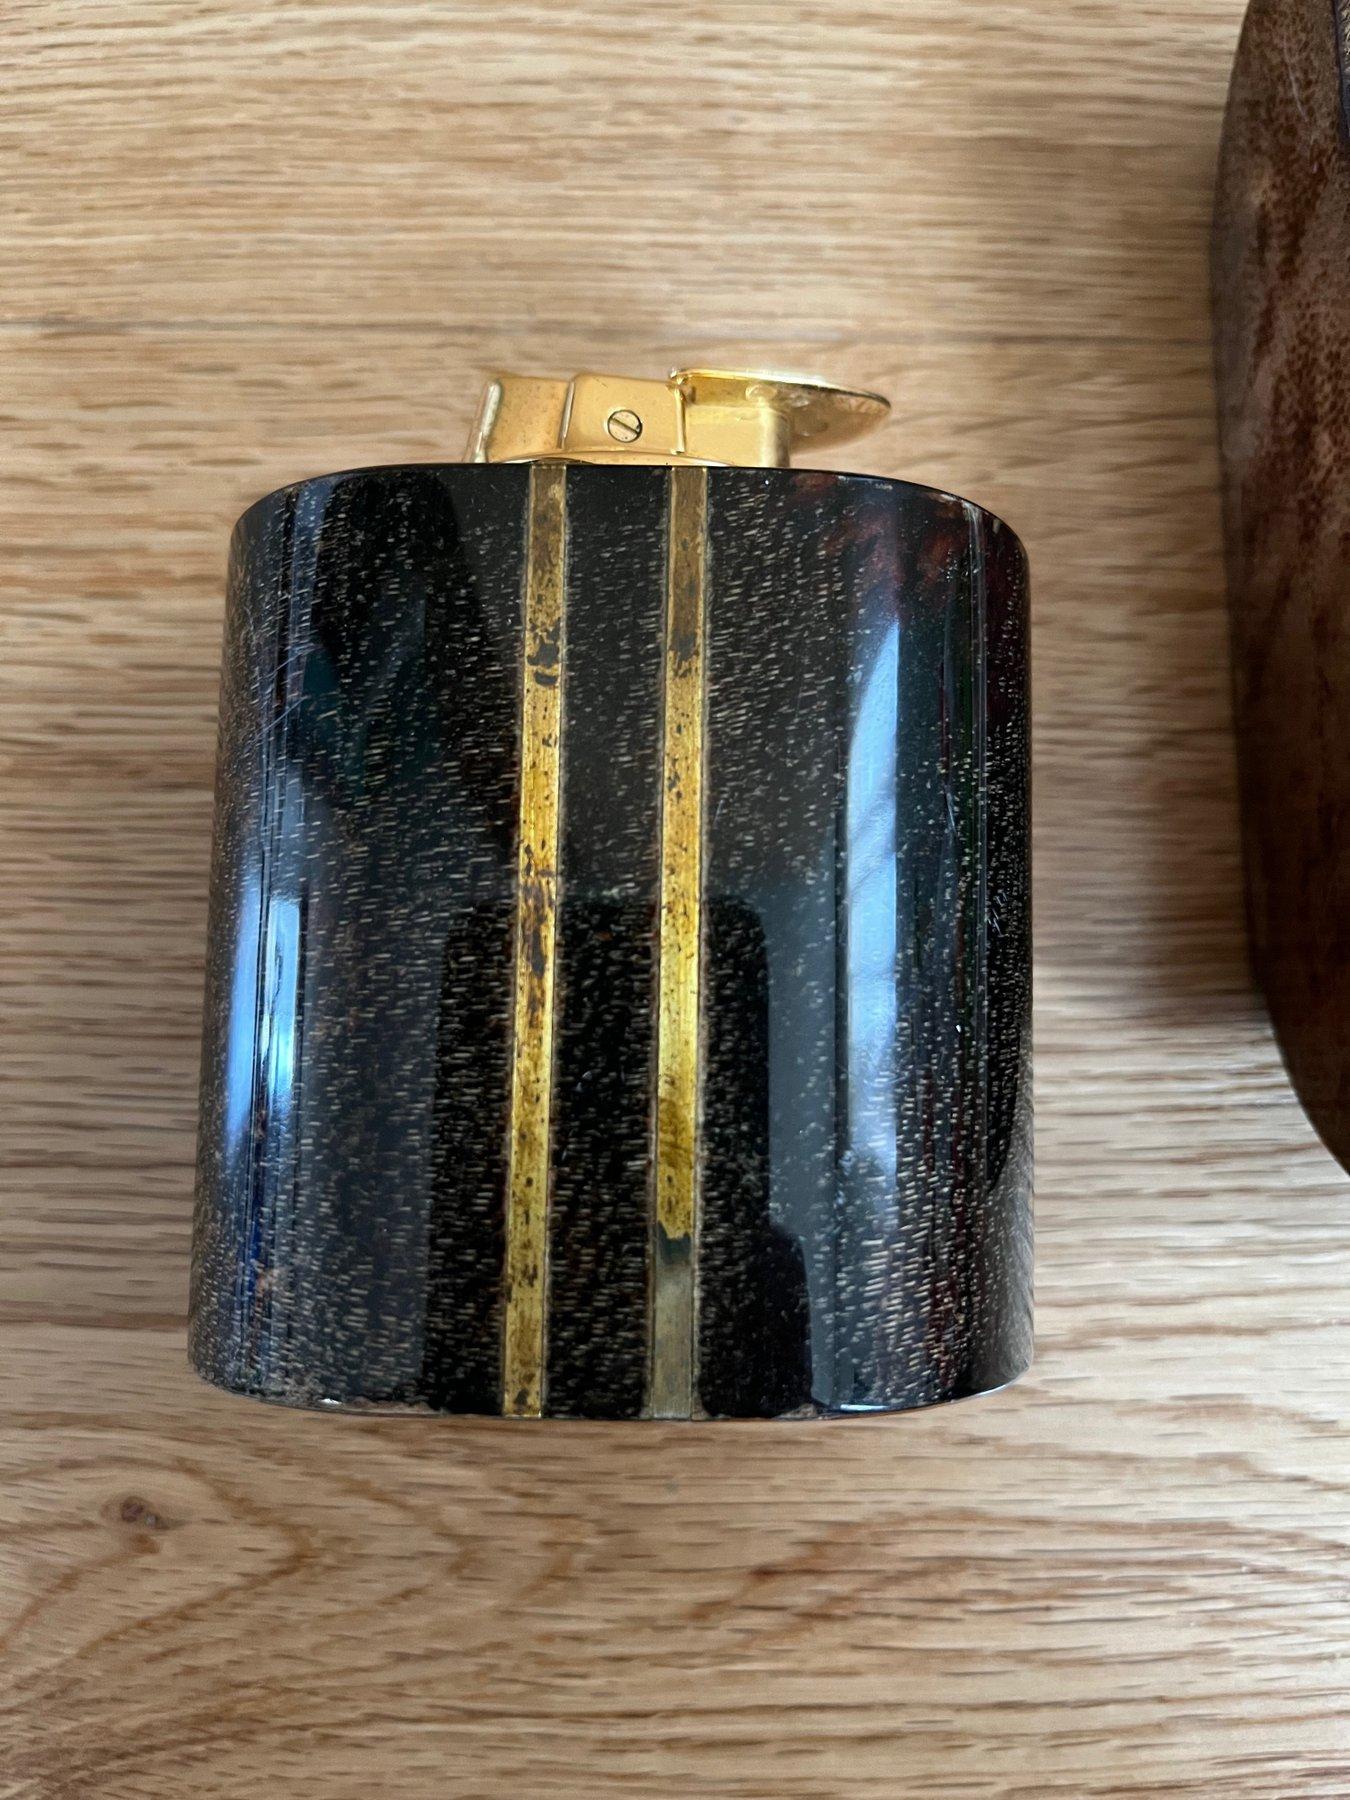 Aldo Tura ashtray and lighter in goatskin veneer with brass elements In Excellent Condition For Sale In Schaerbeek, BE